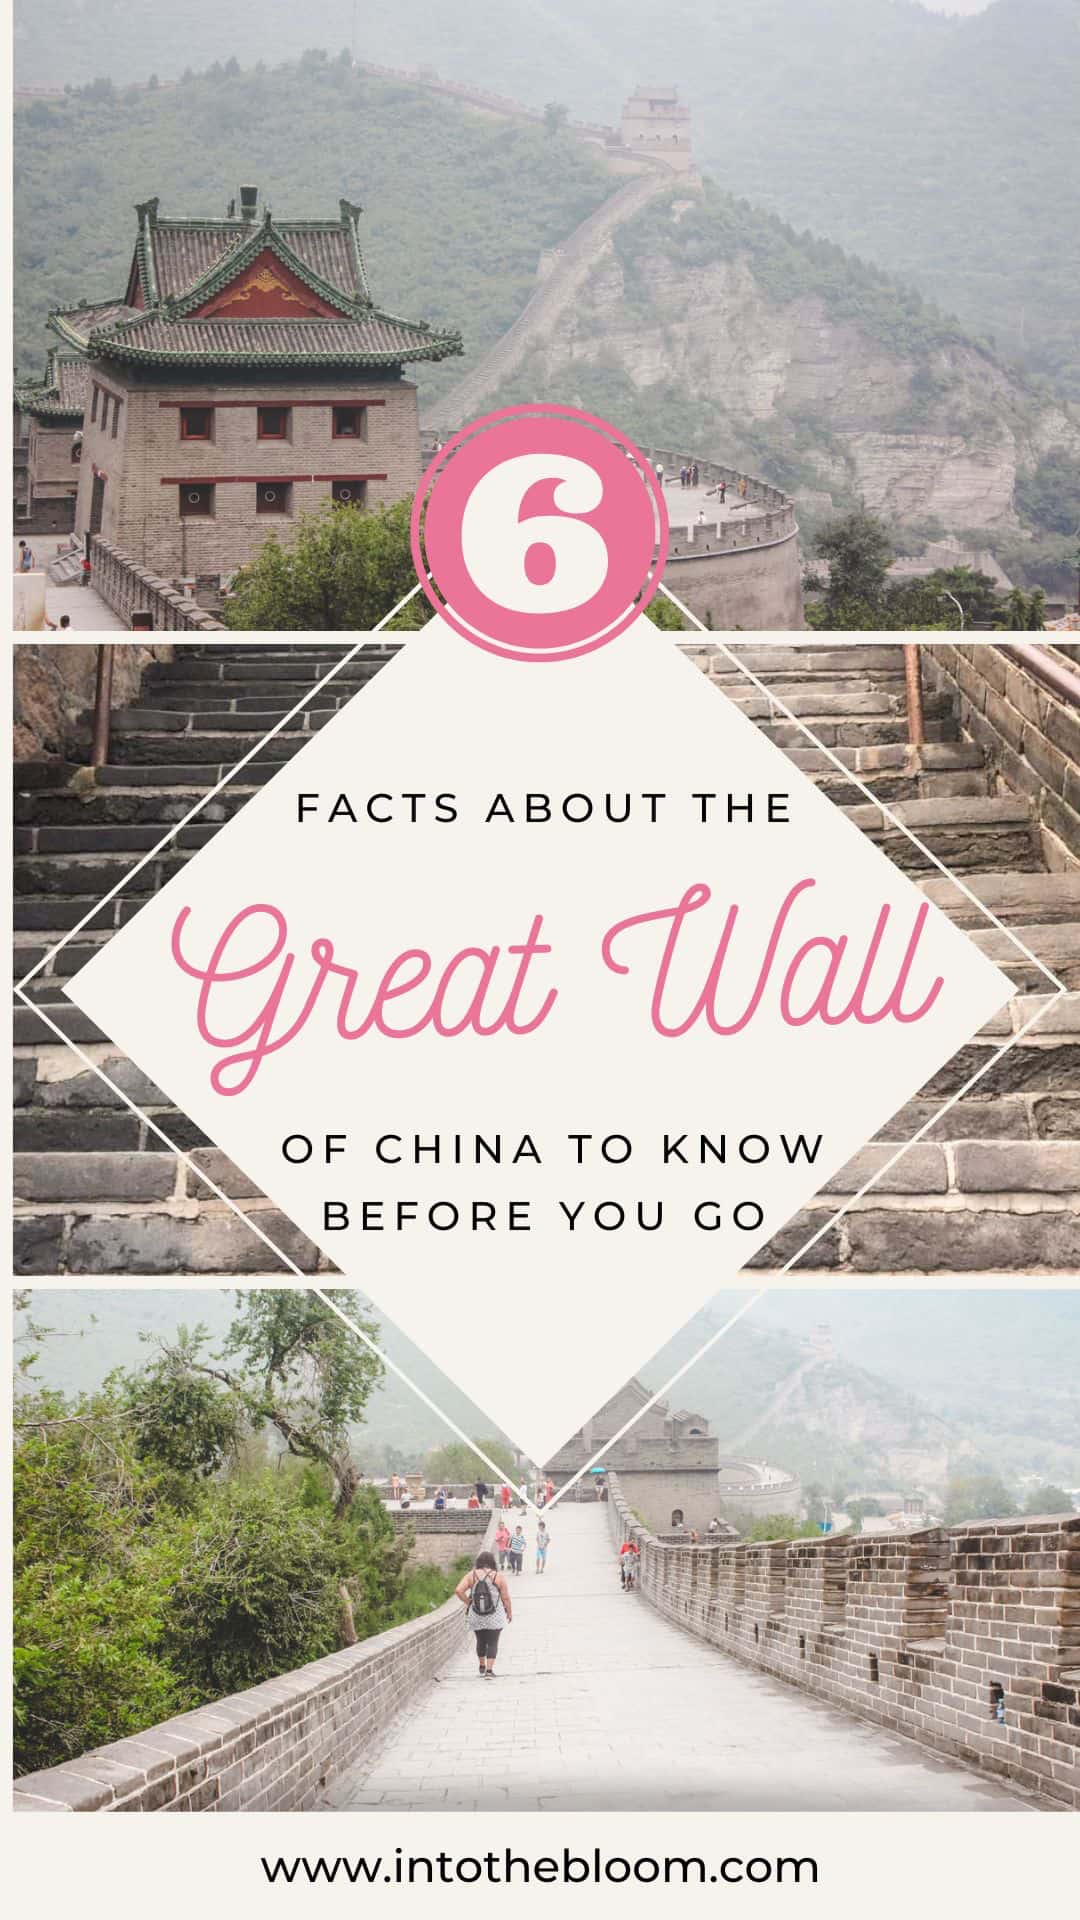 6 facts about the Great Wall of China you should know before visiting - China Travel Guide